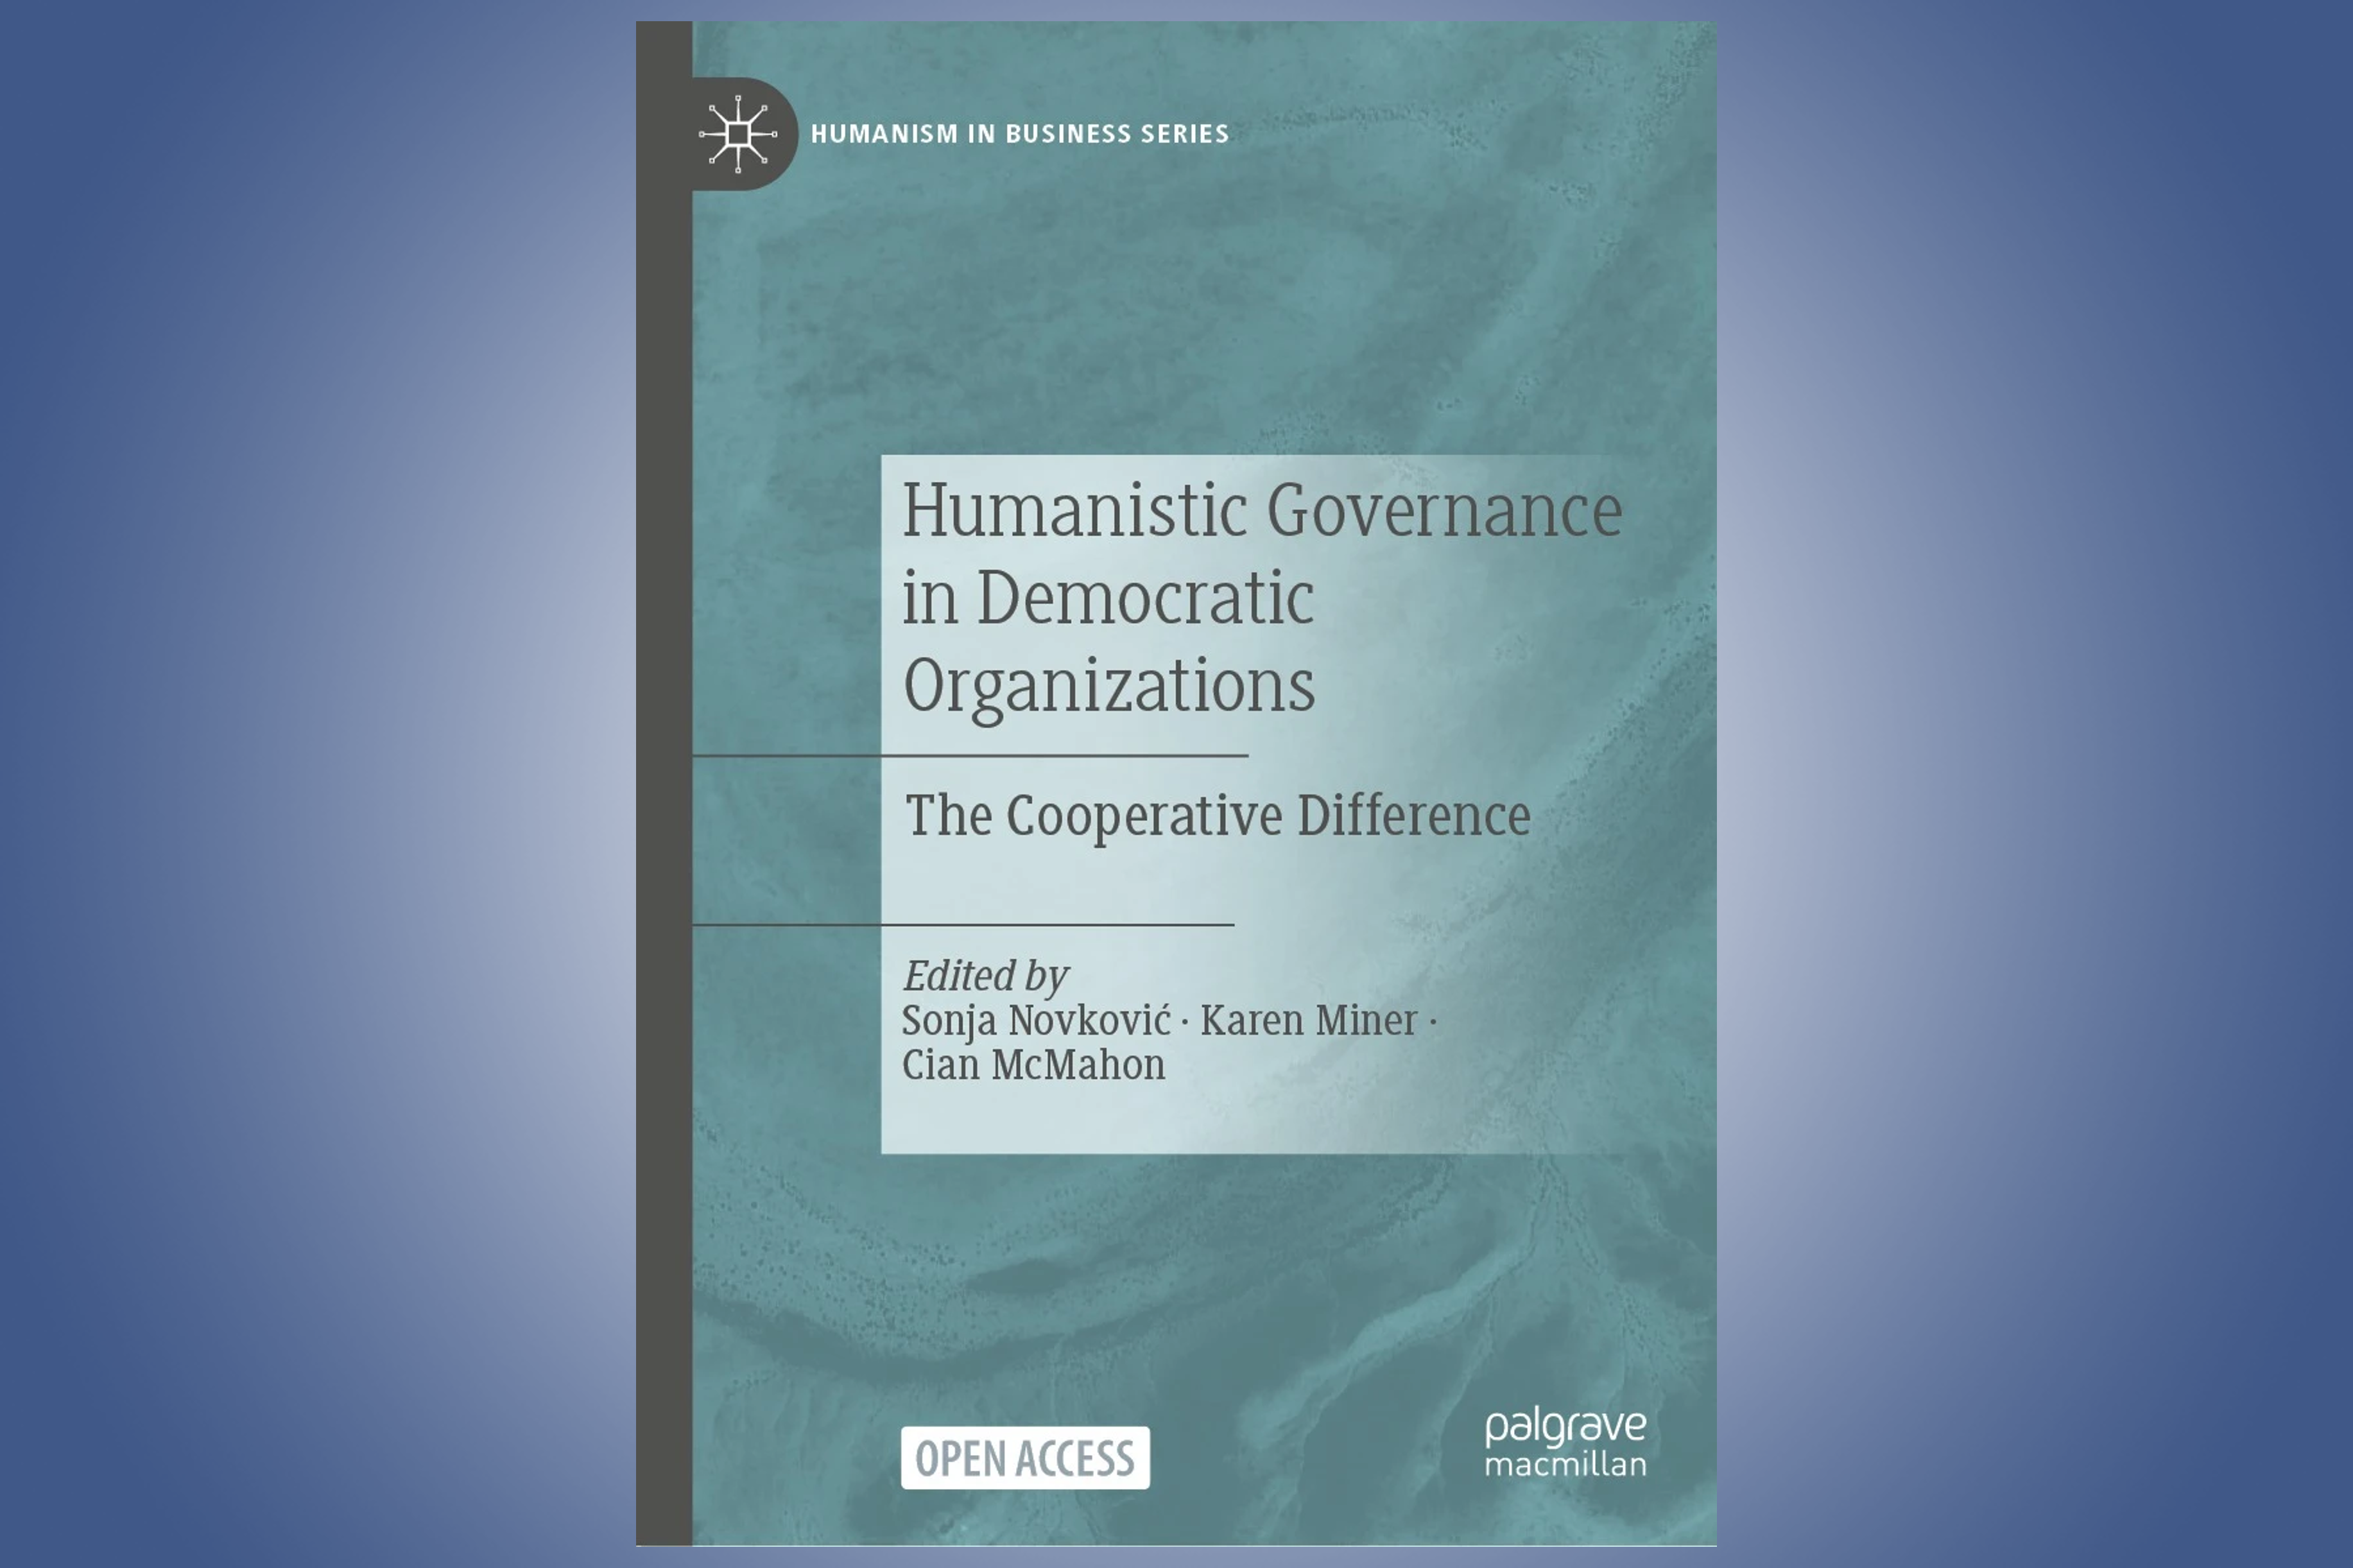 Humanistic Governance in Democratic Organizations – The Cooperative Difference